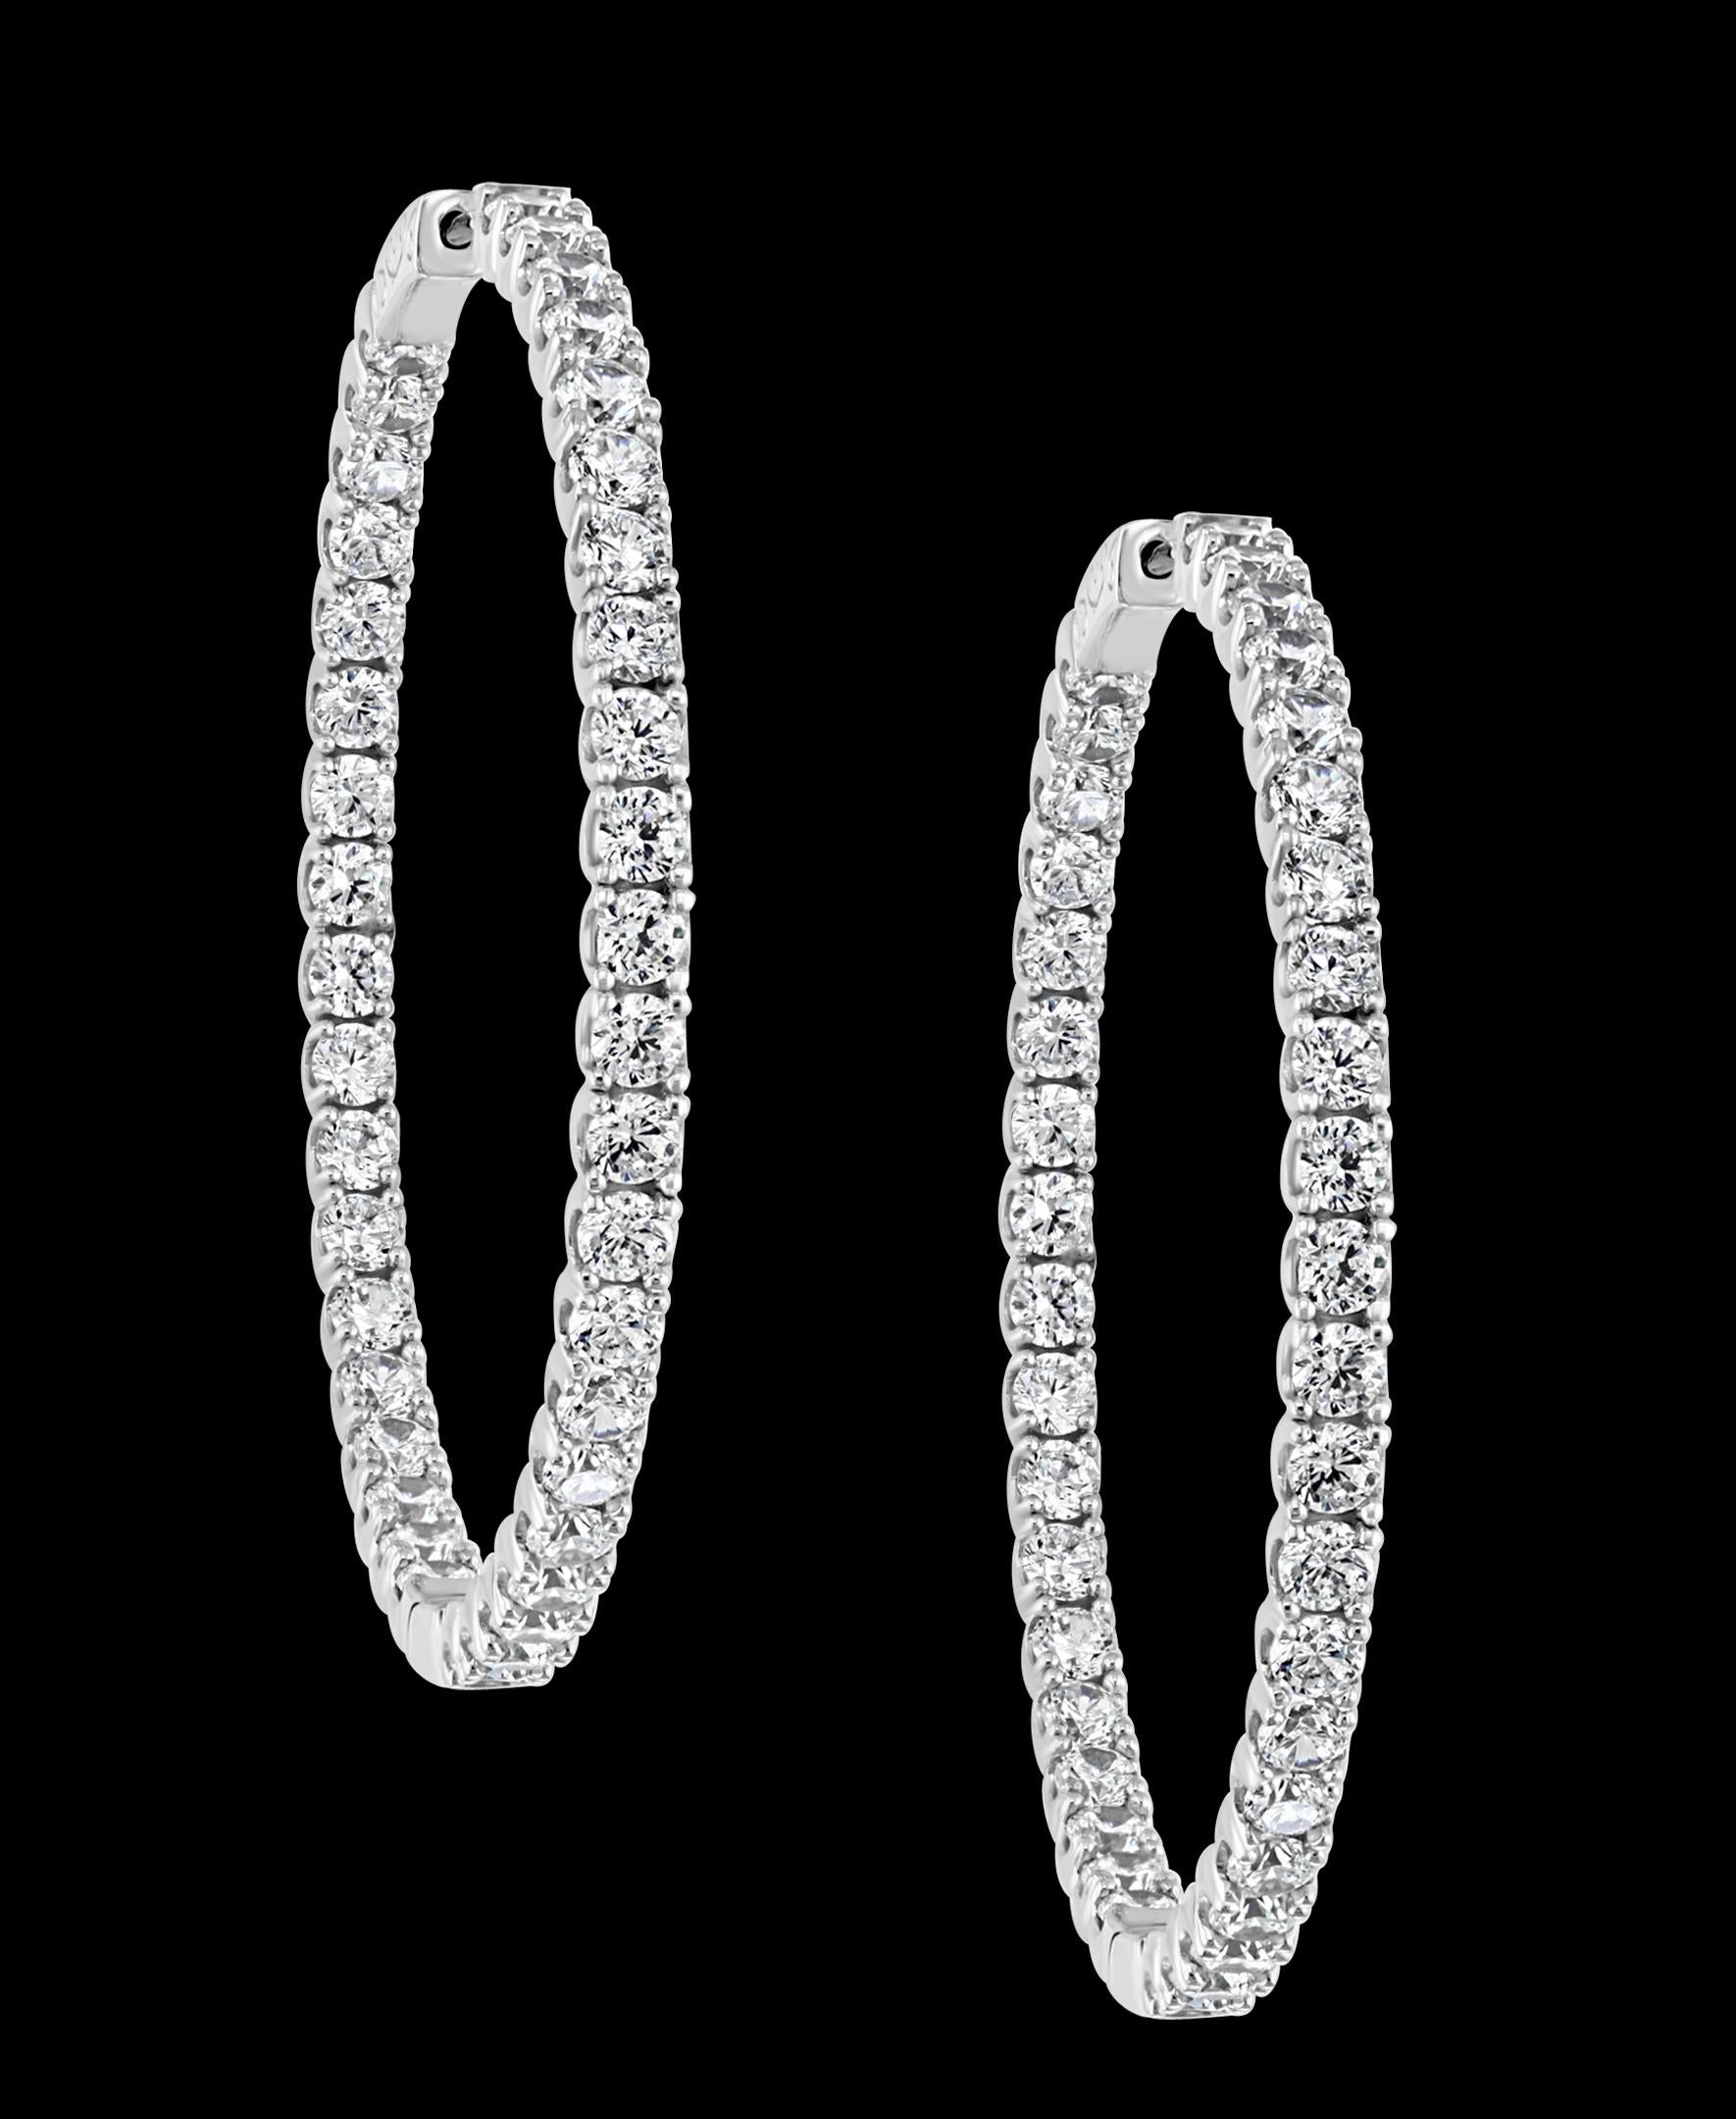 Please read the review about his item from the customer who purchased it from me.
Cubic Zirconia or CZ is the cubic Crystalline form Of Zirconium dioxide. Its Hard and Usually  colorless.
These hoops are amazing . Just looks like diamonds inside out